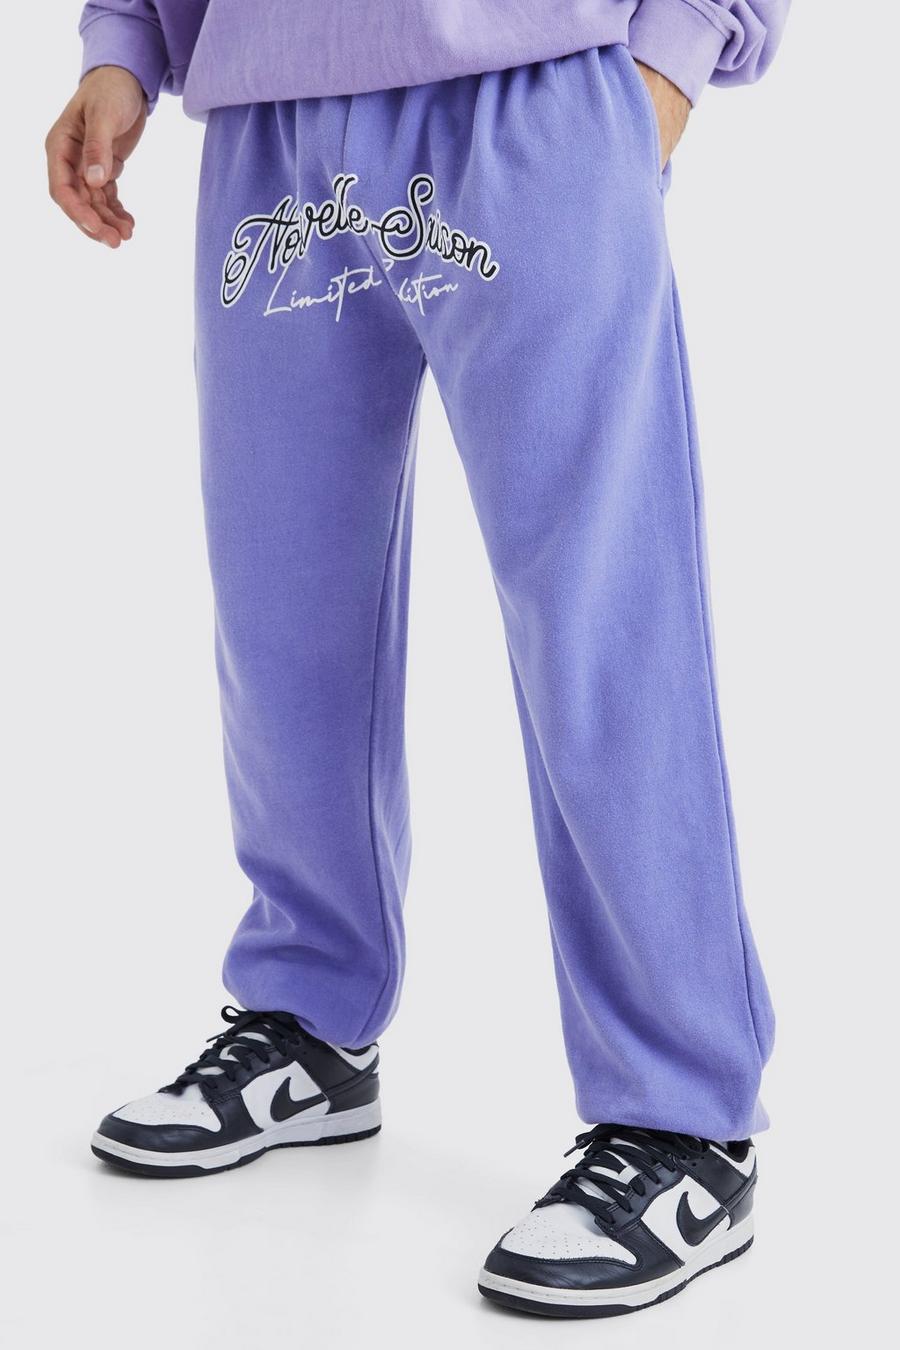 Men's Oversized Limited Edition Crotch Graphic Jogger | Boohoo UK